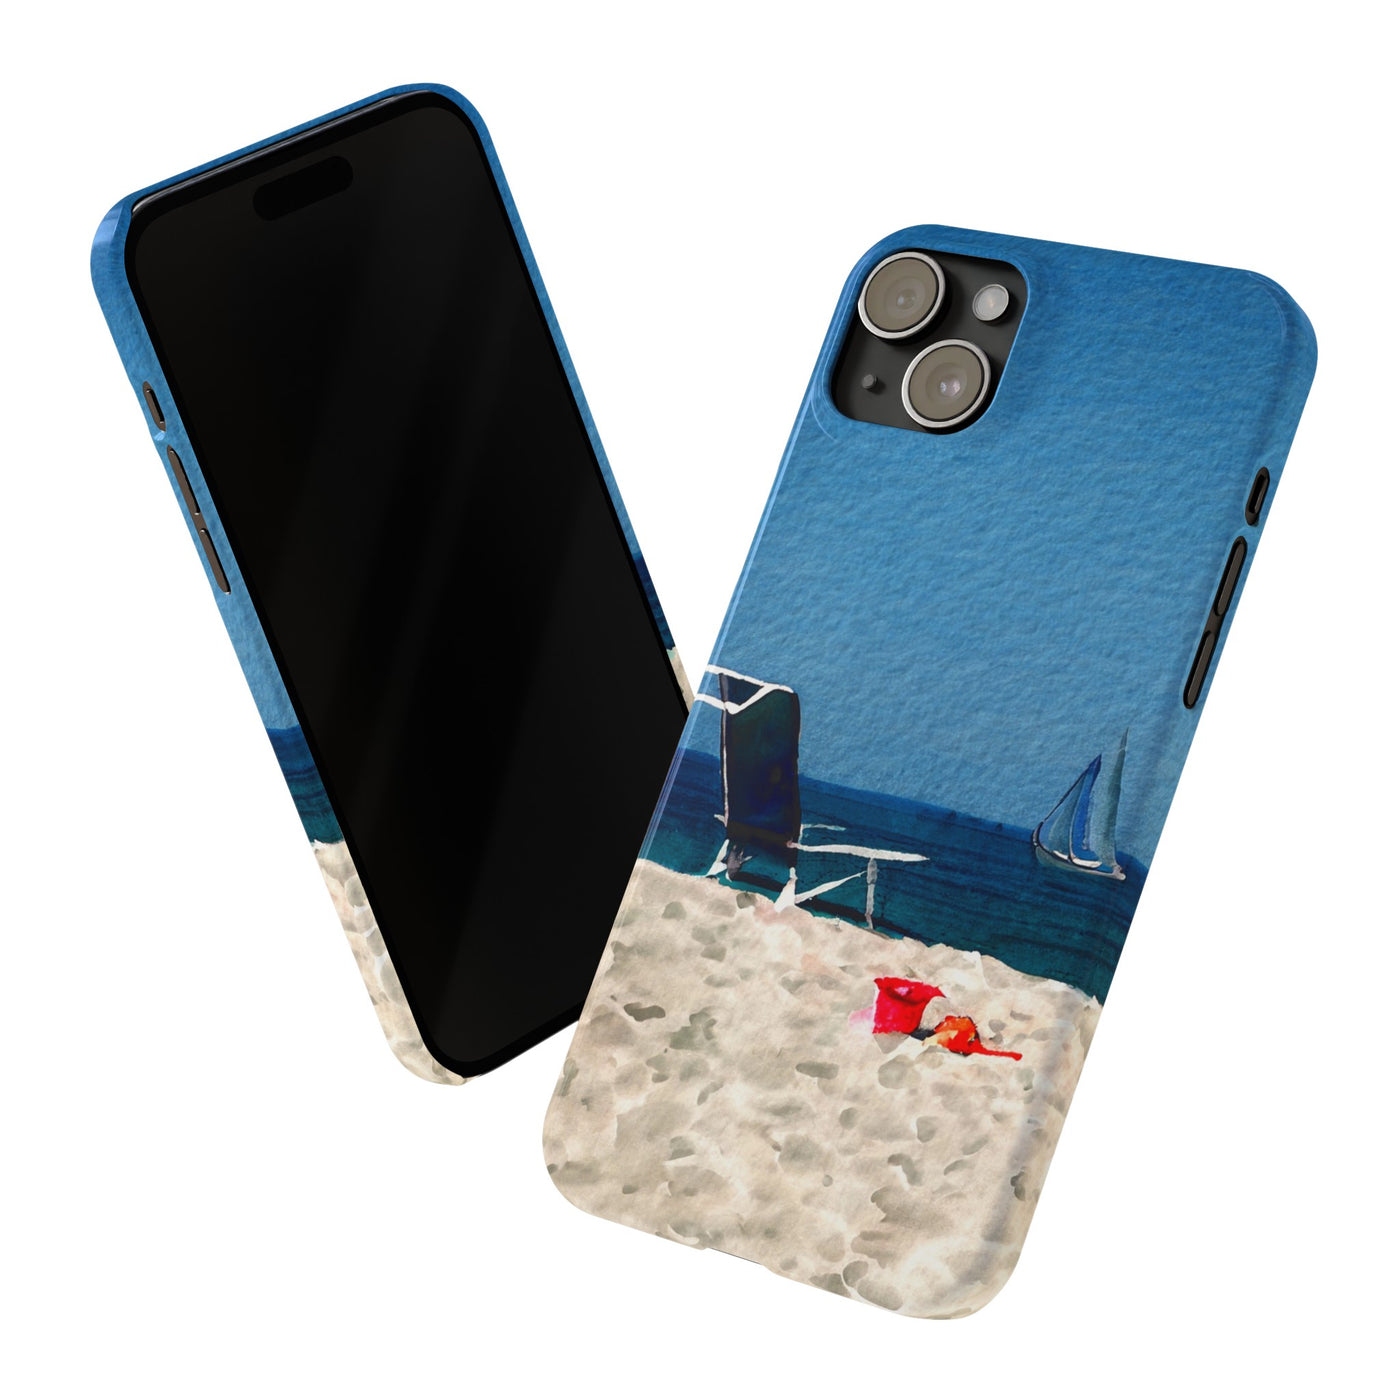 Slim Cute iPhone Cases - | iPhone 15 Case | iPhone 15 Pro Max Case, Iphone 14 Case, Iphone 14 Pro Max, Iphone 13, Summer Beach Chair Watercolor